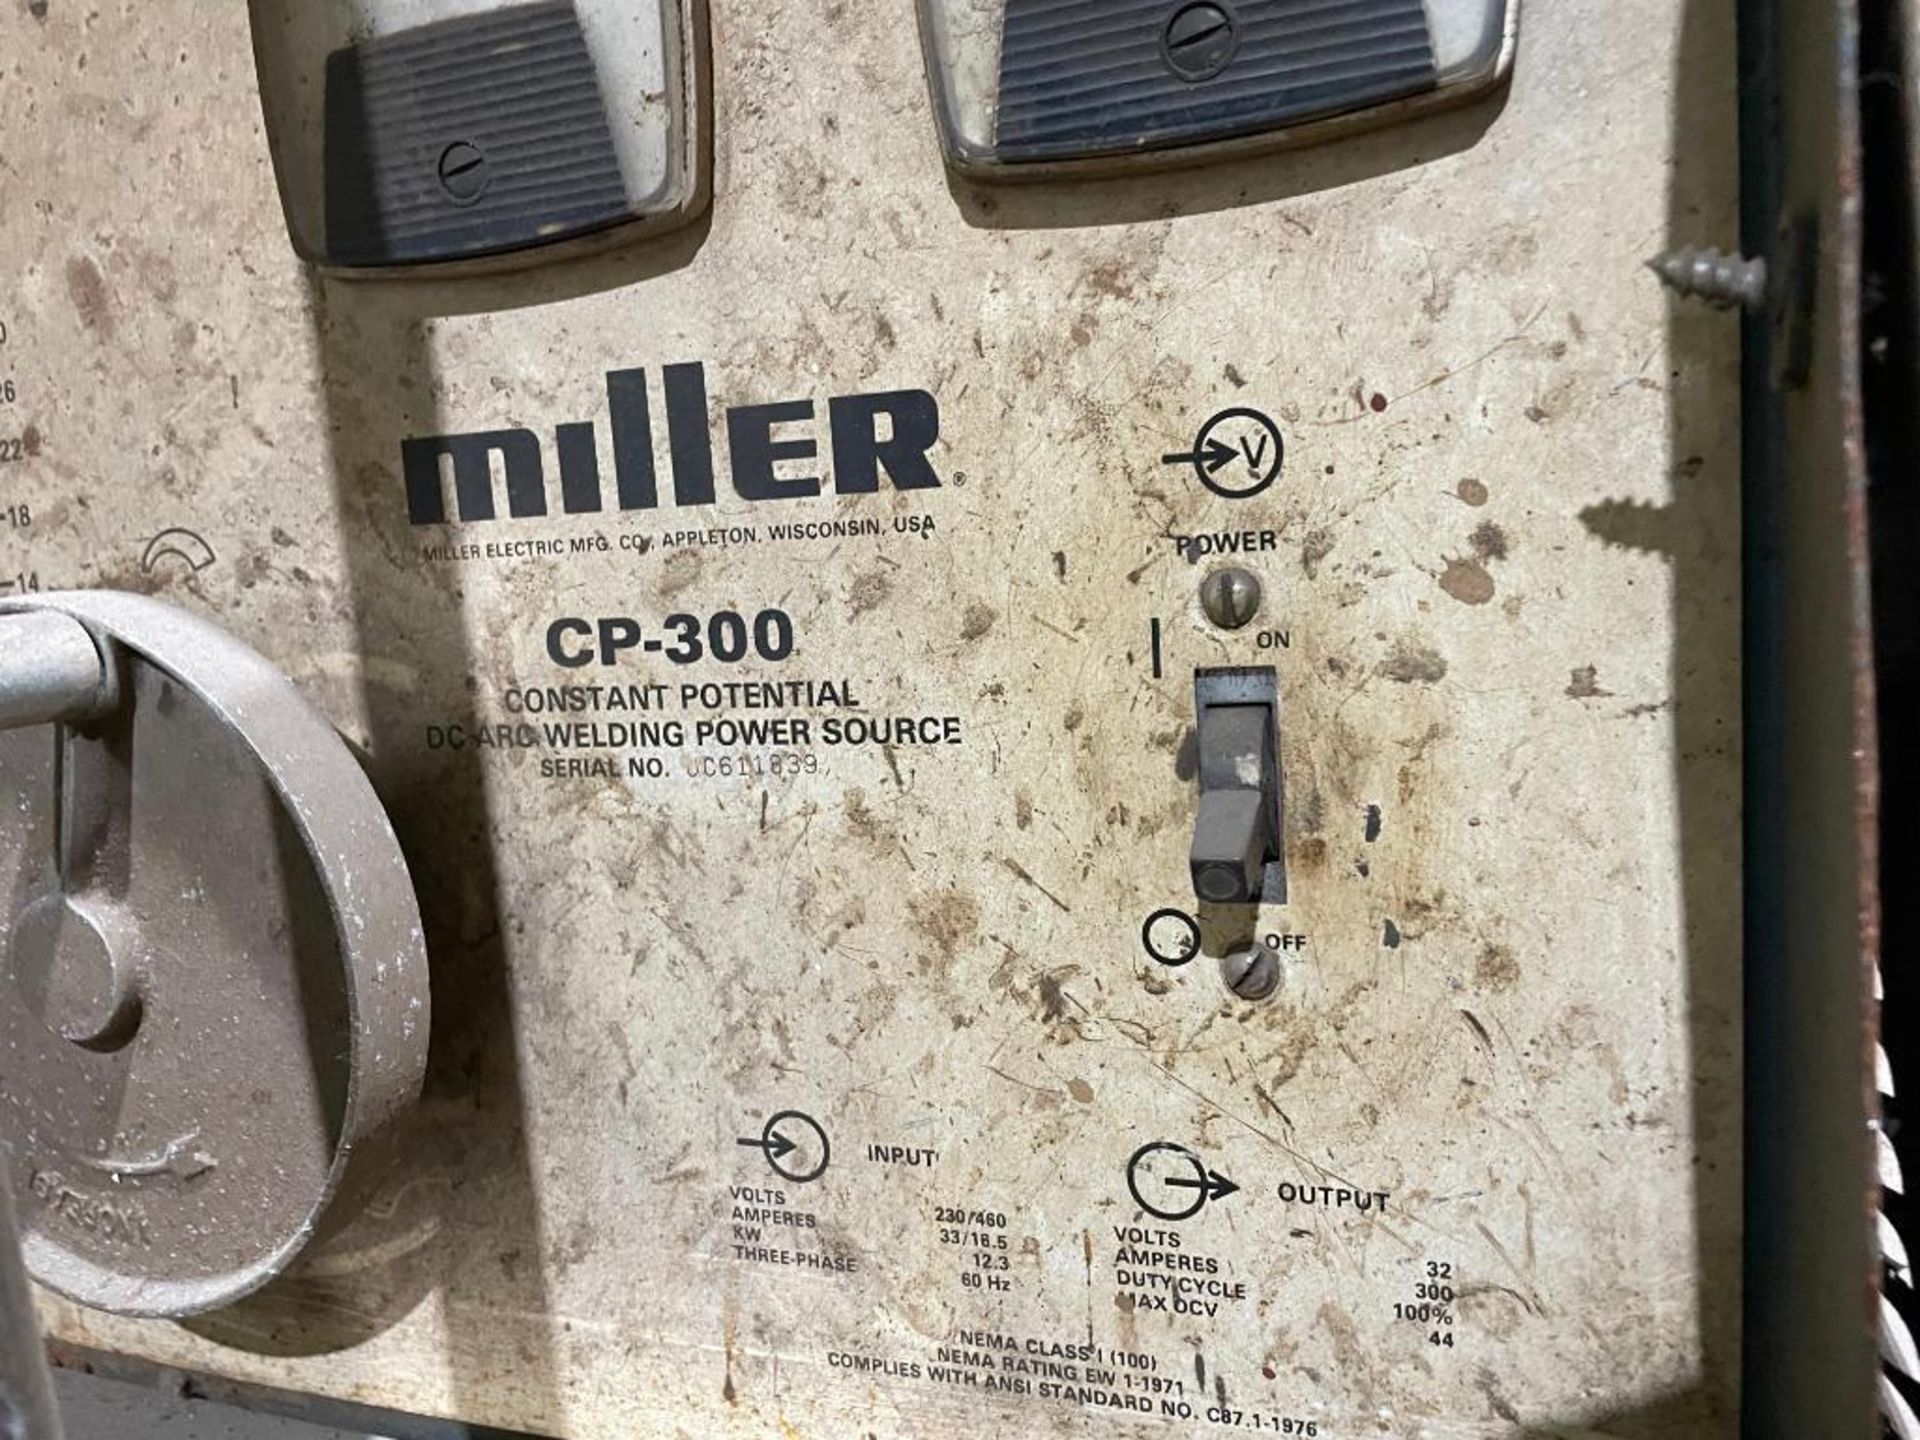 DESCRIPTION MILLER CP-300 DC ARC WELDING POWER SOURCE WELDER (NOT IN WORKING CONDITION, FOR PARTS) B - Image 5 of 8